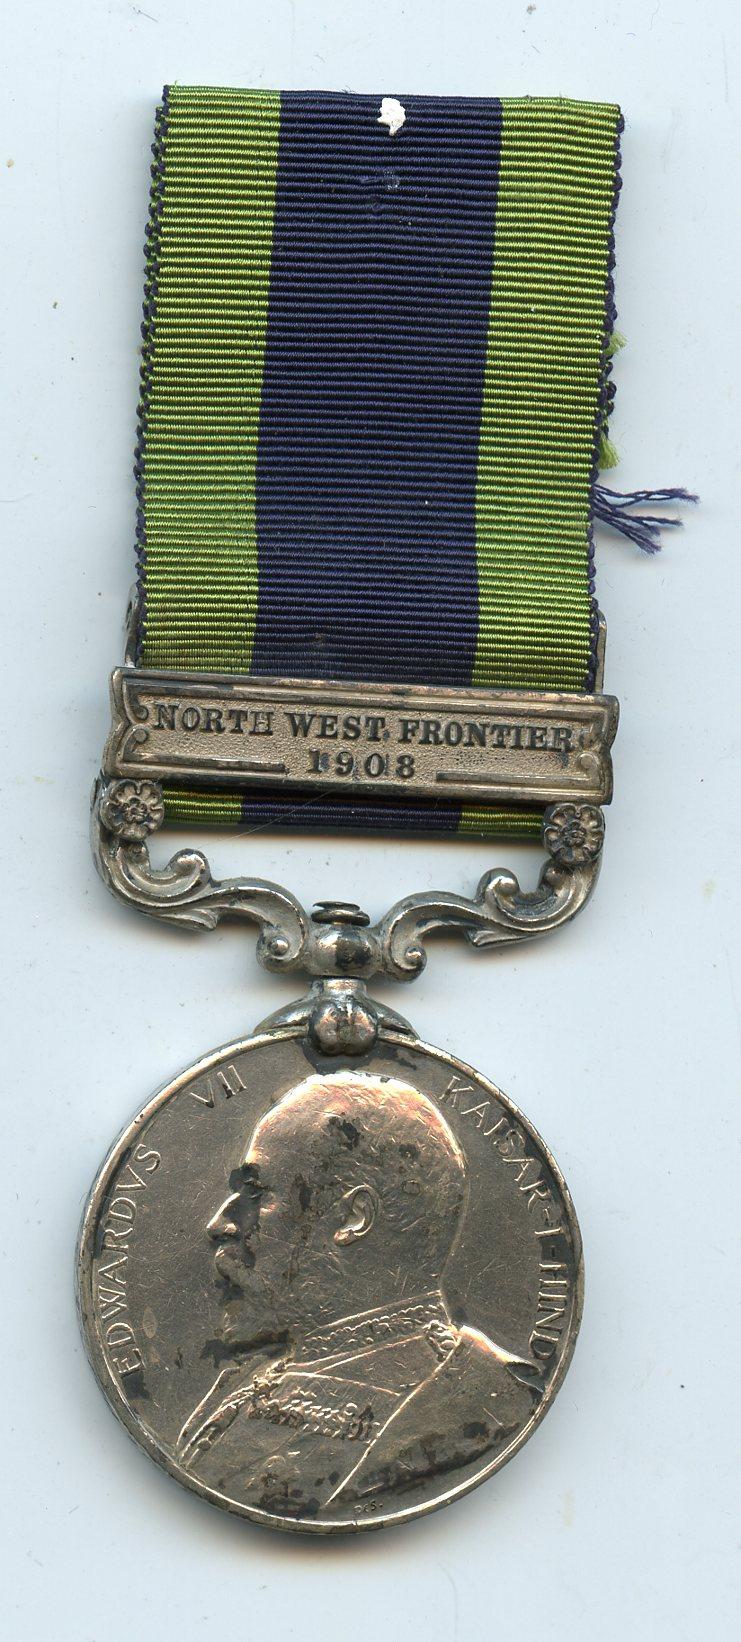 India General Service Medal North West Frontier 1908  Subdr  Mardan Khan 21st Punjabis